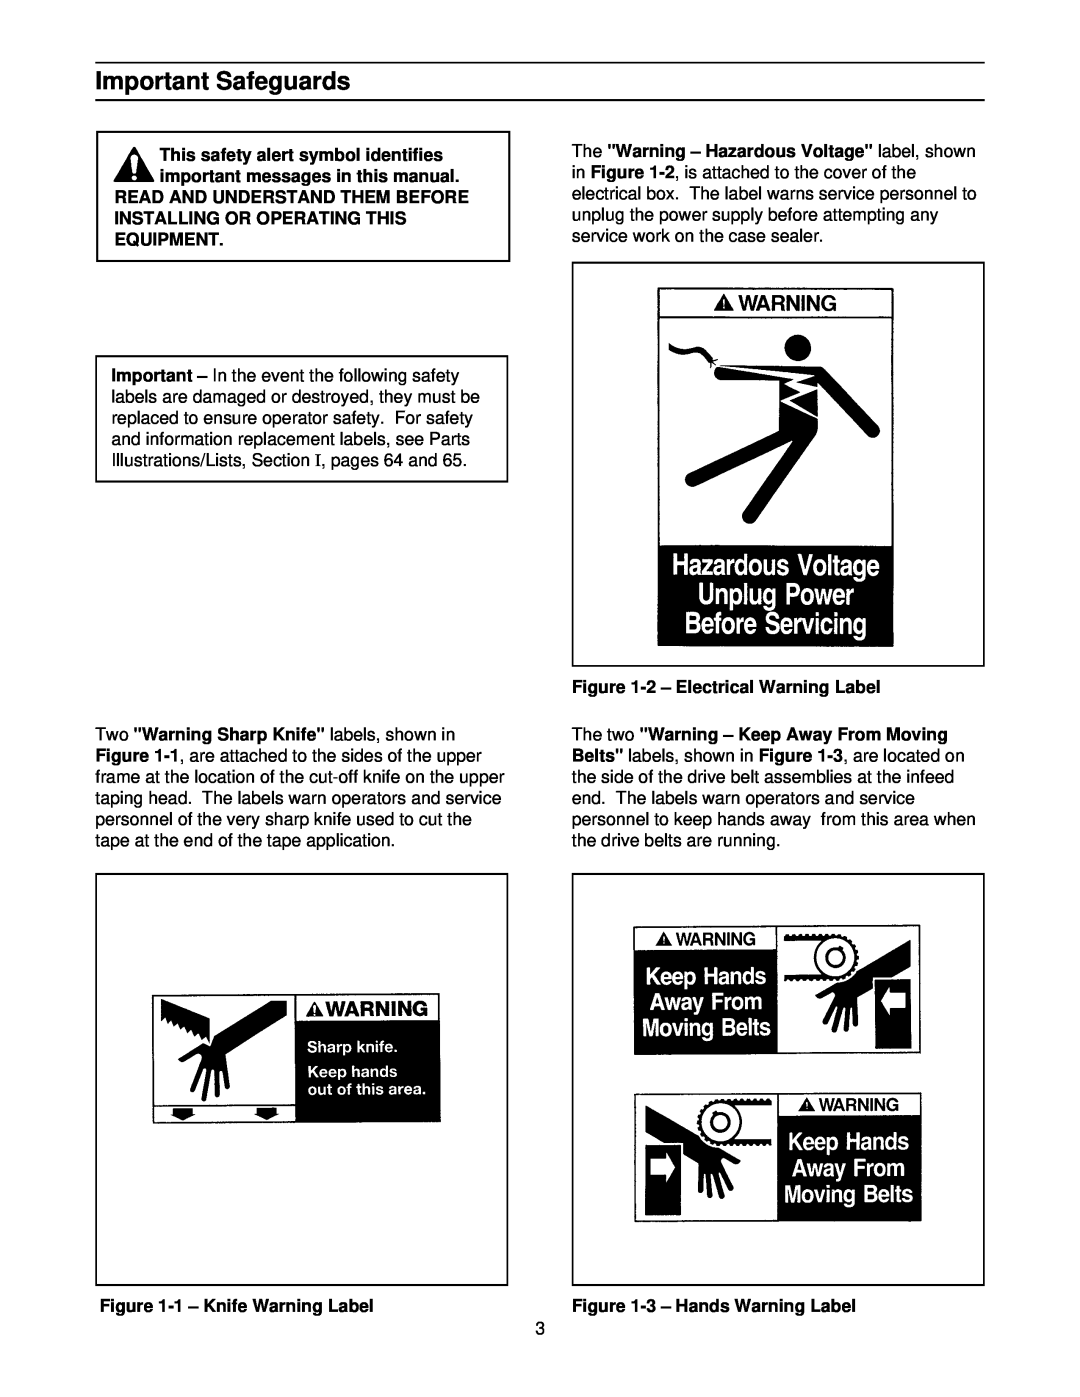 3M 39600 Important Safeguards, This safety alert symbol identifies important messages in this manual 